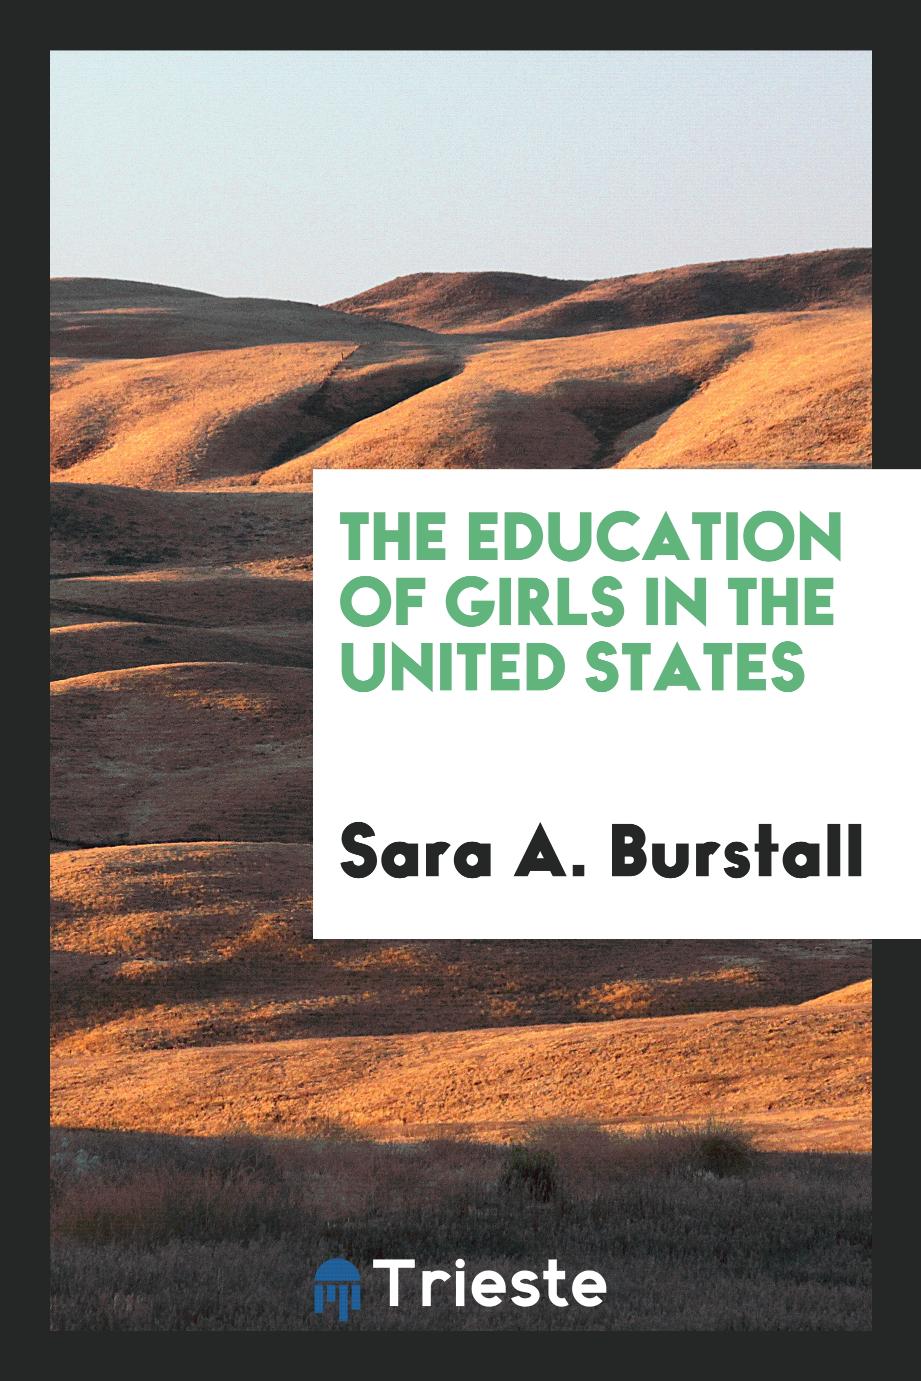 The Education of Girls in the United States